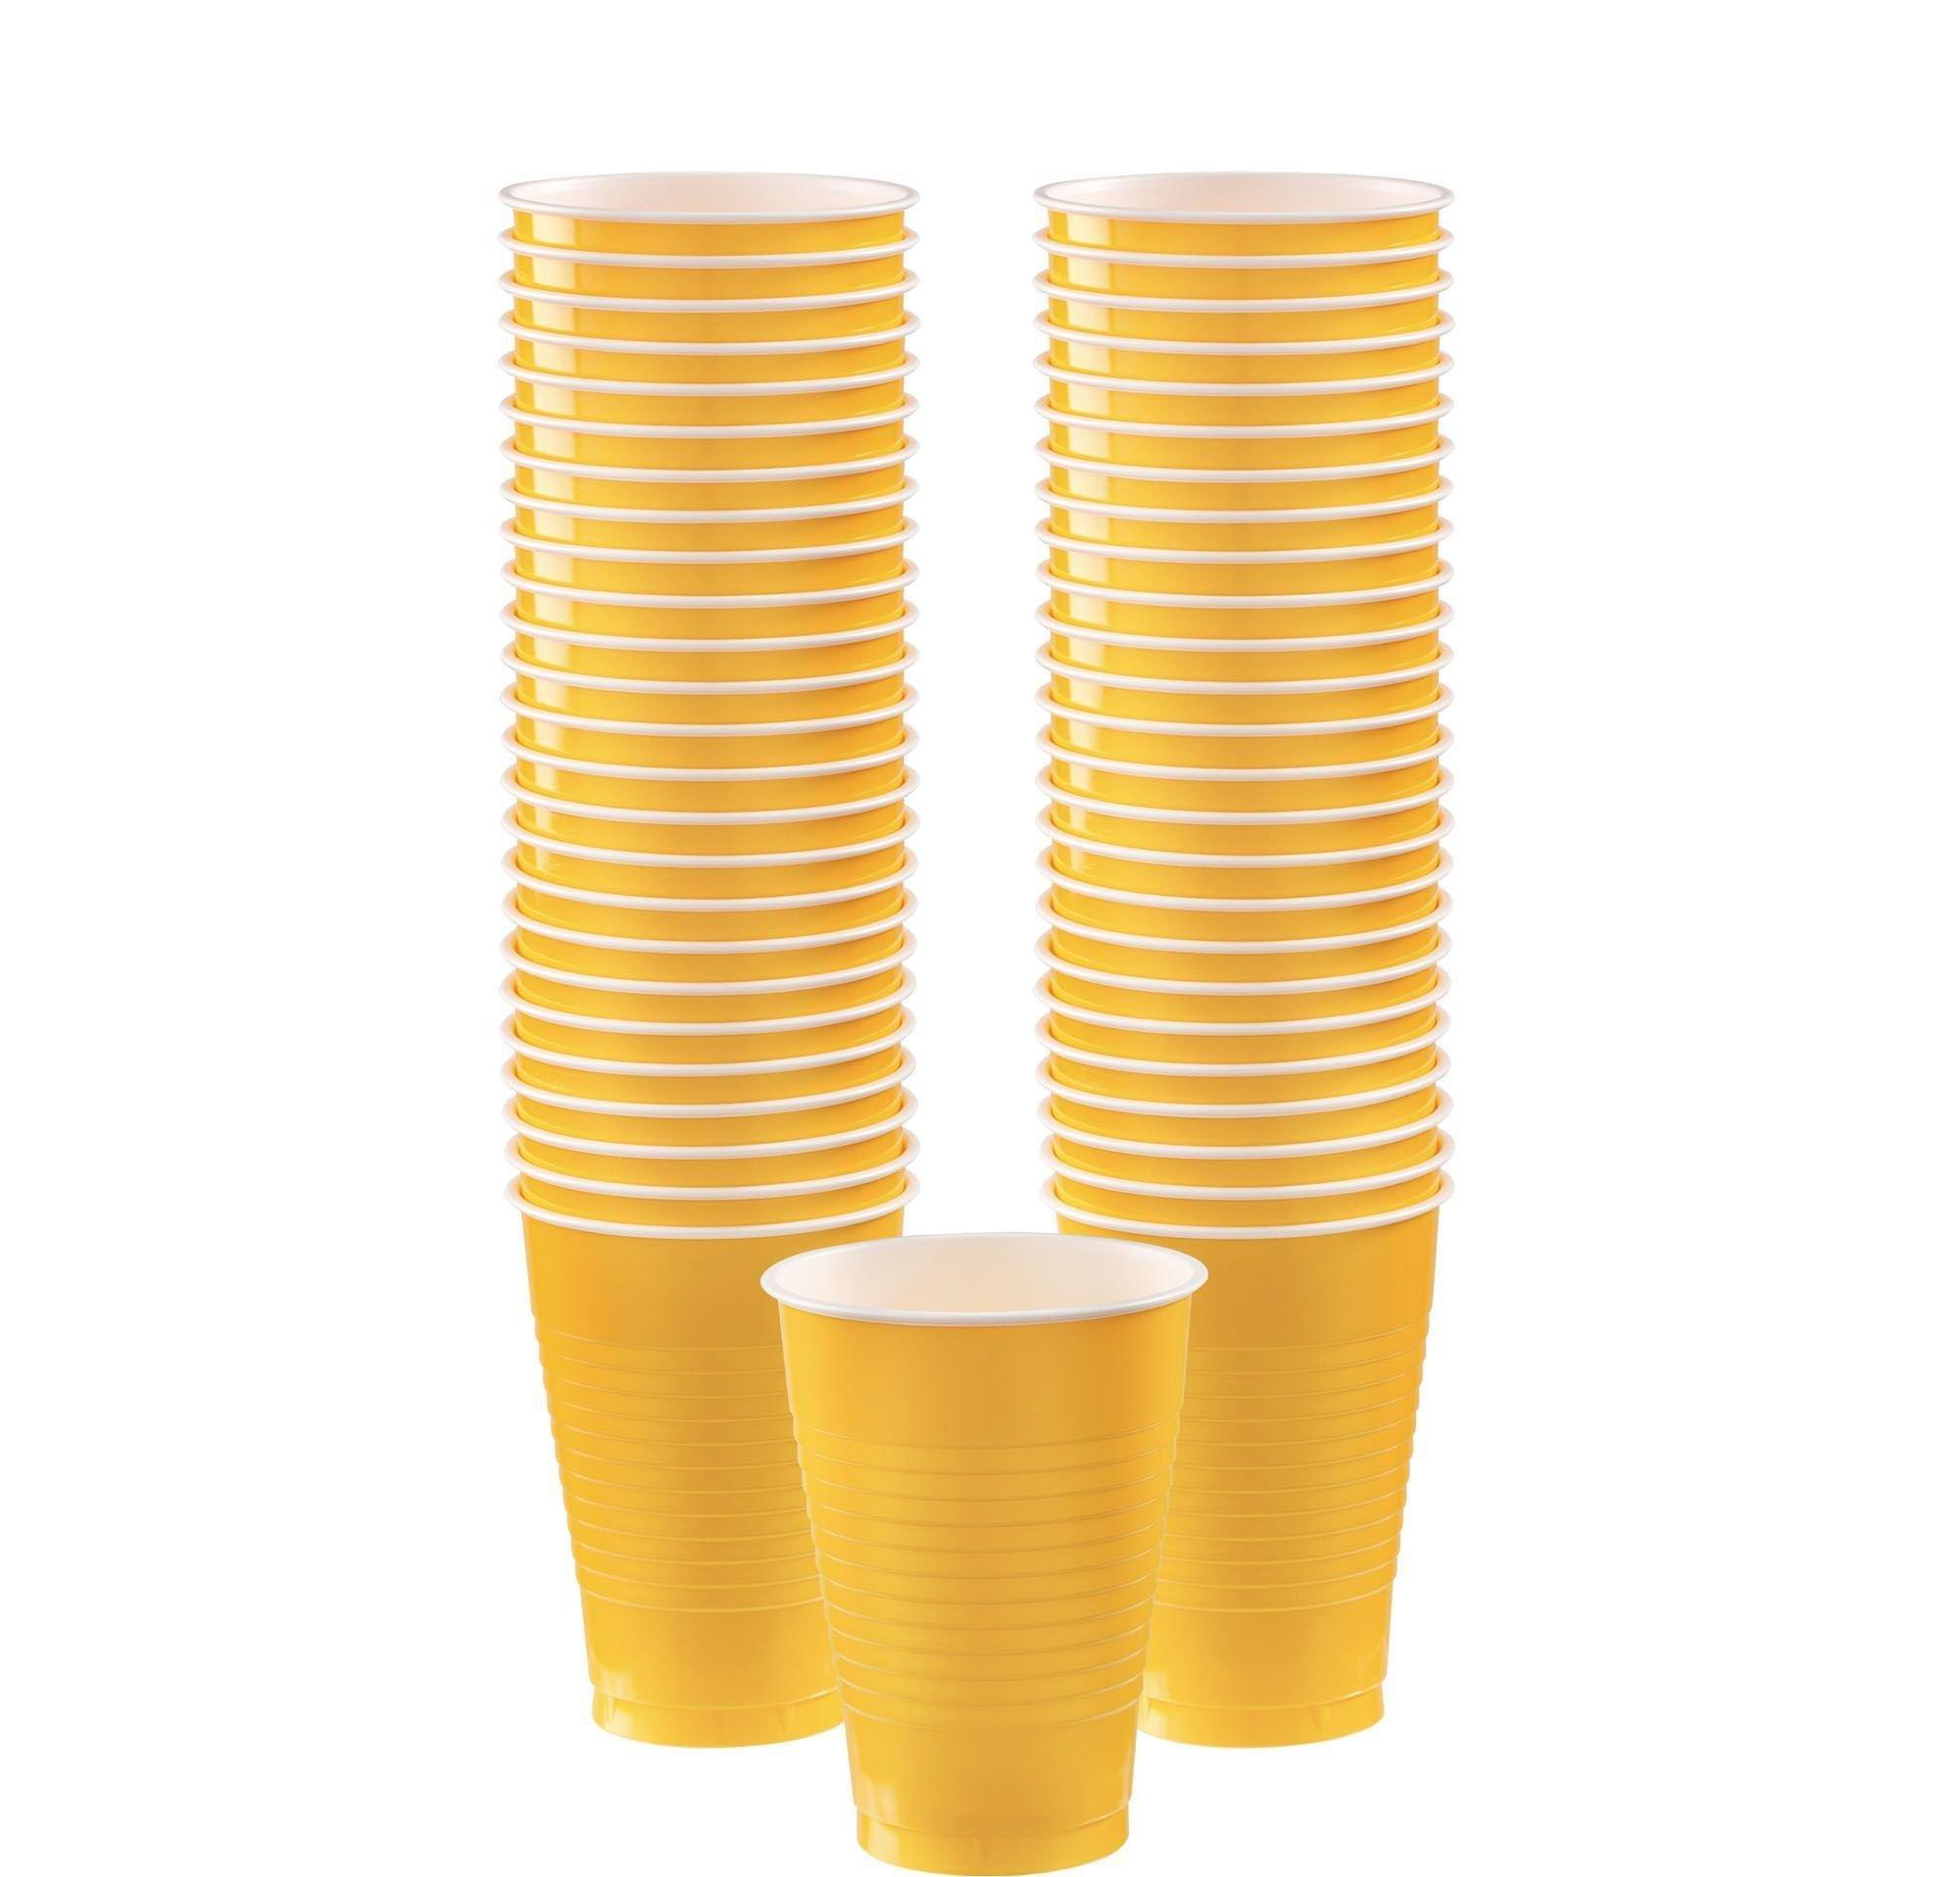 Graduation Party Supplies Kit for 20 with Decorations, Plates, Napkins, Cups - Yellow Congrats Grad